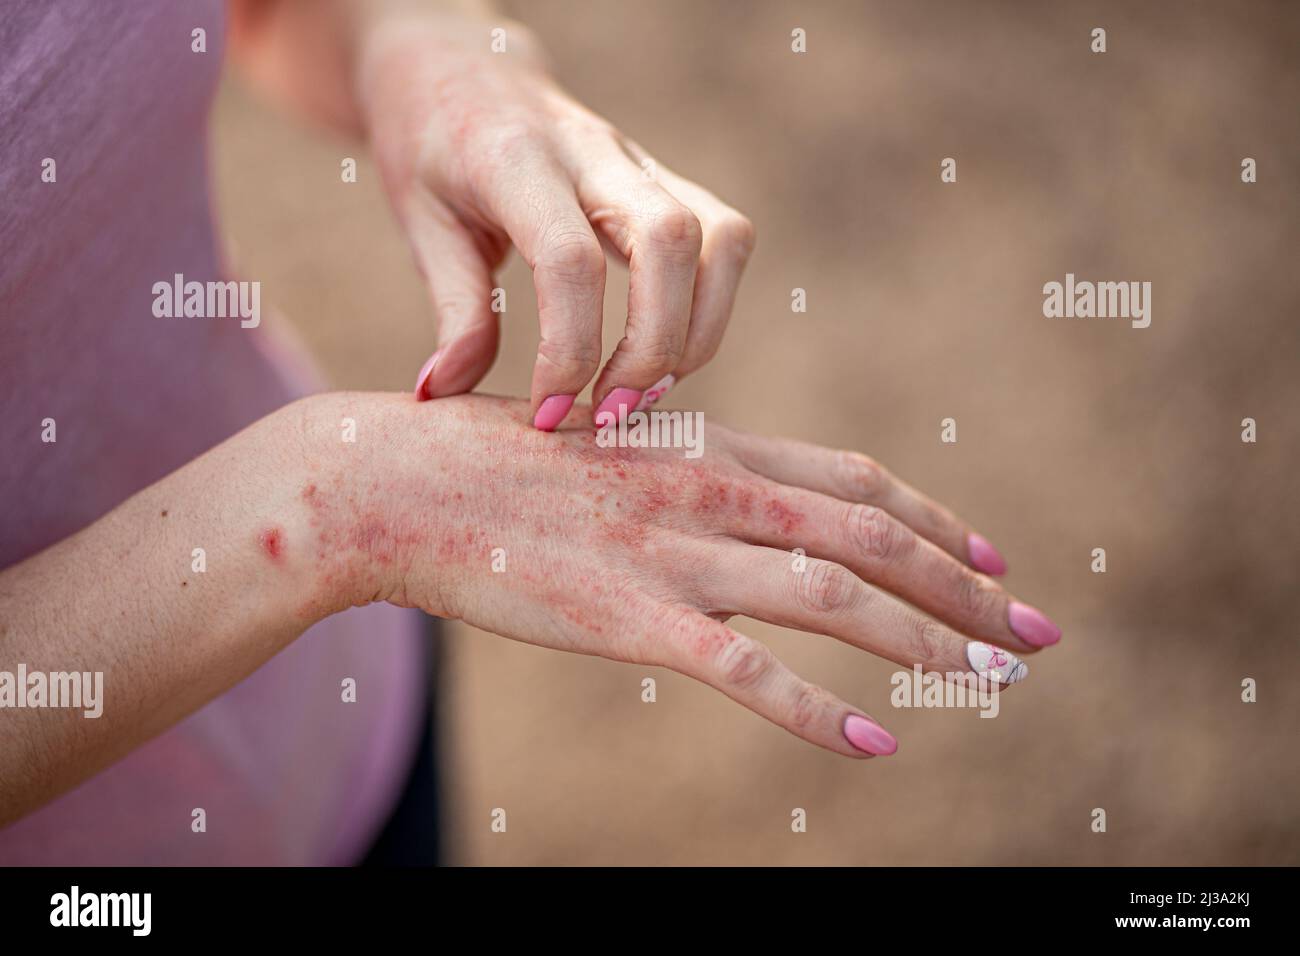 eczema dermatitis on hands and feet. red spots on the skin. dry skinThe concept dermatology, treatment fungal. woman scratching her hand. Stock Photo